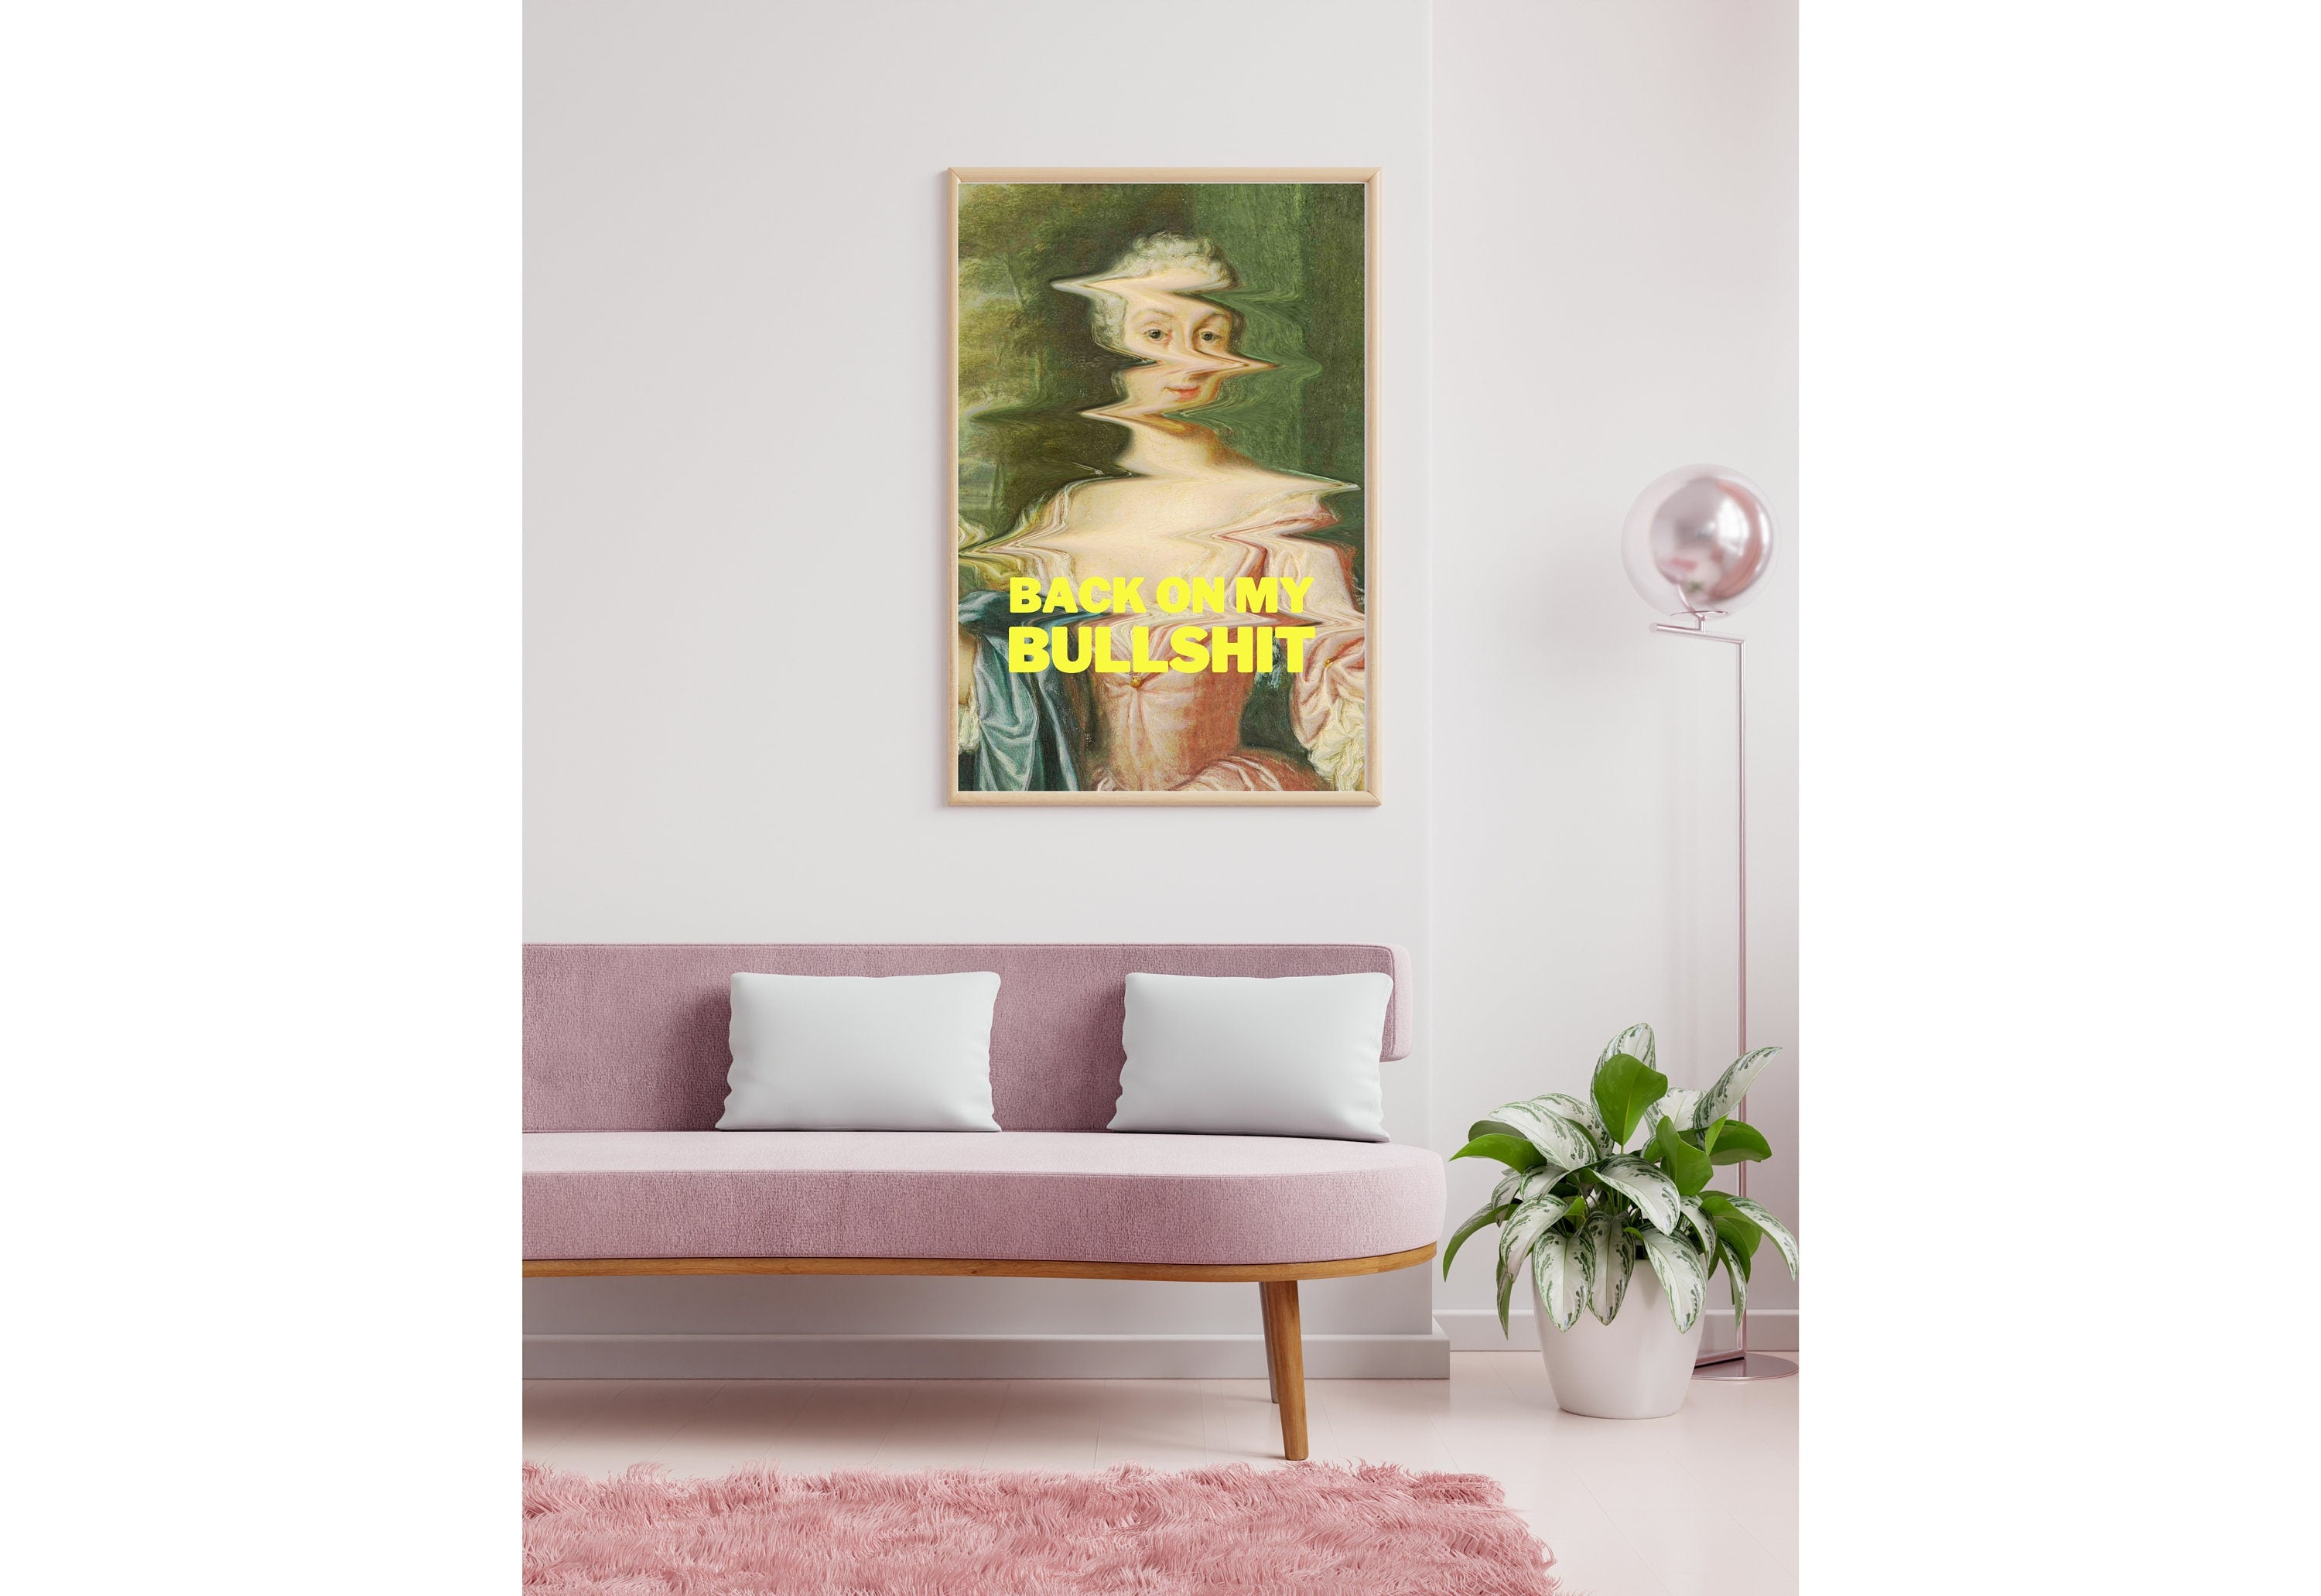 Expressive and bold digital print that reads 'Back on my Bullshit,' resonating with personal empowerment.